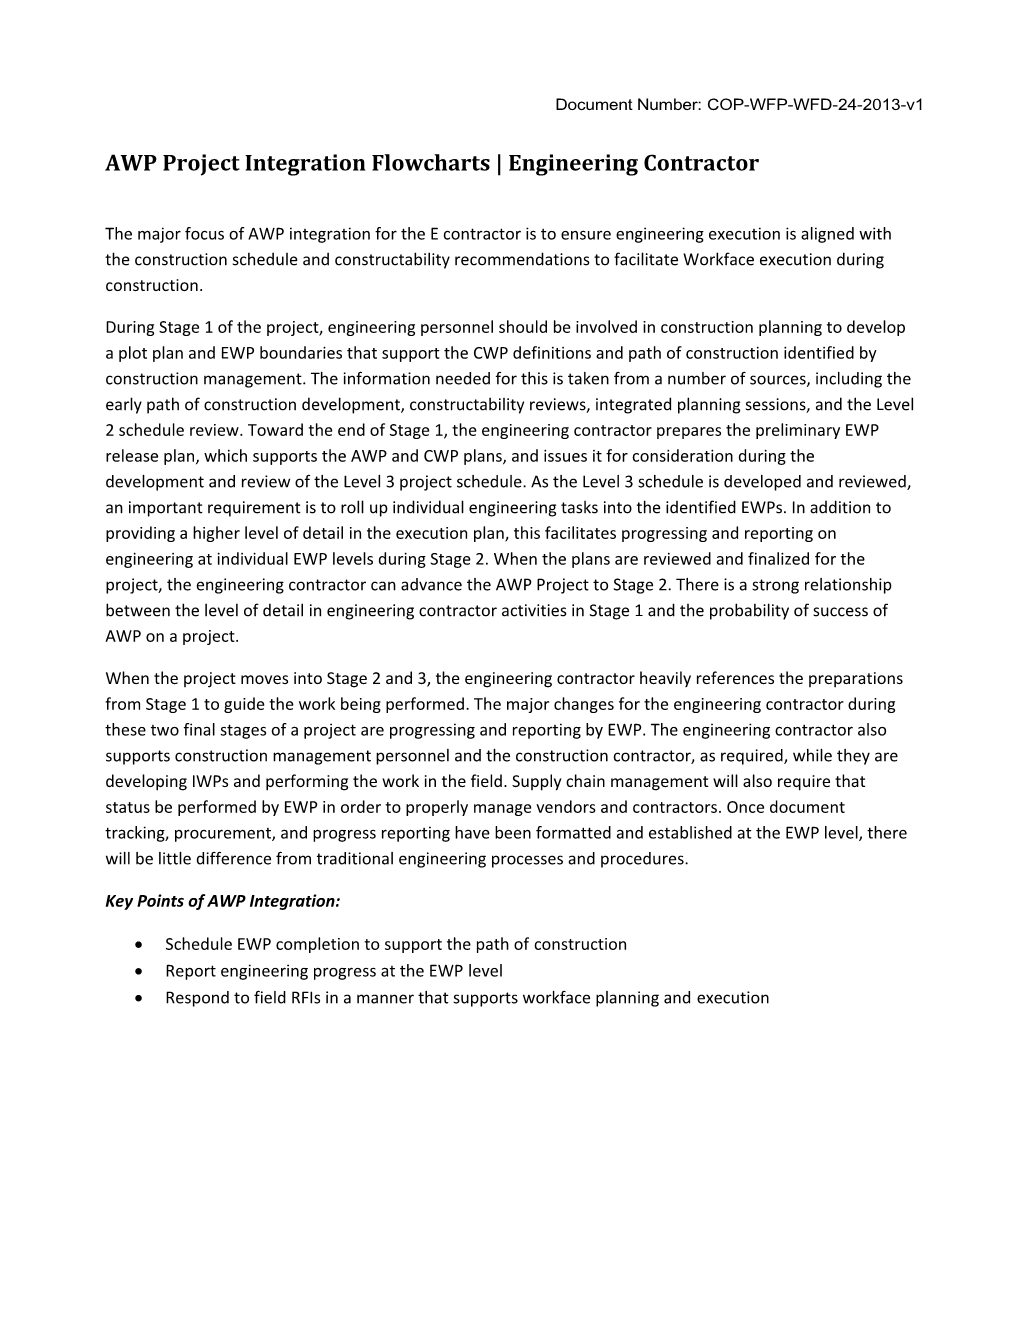 AWP Project Integration Flowcharts Engineering Contractor